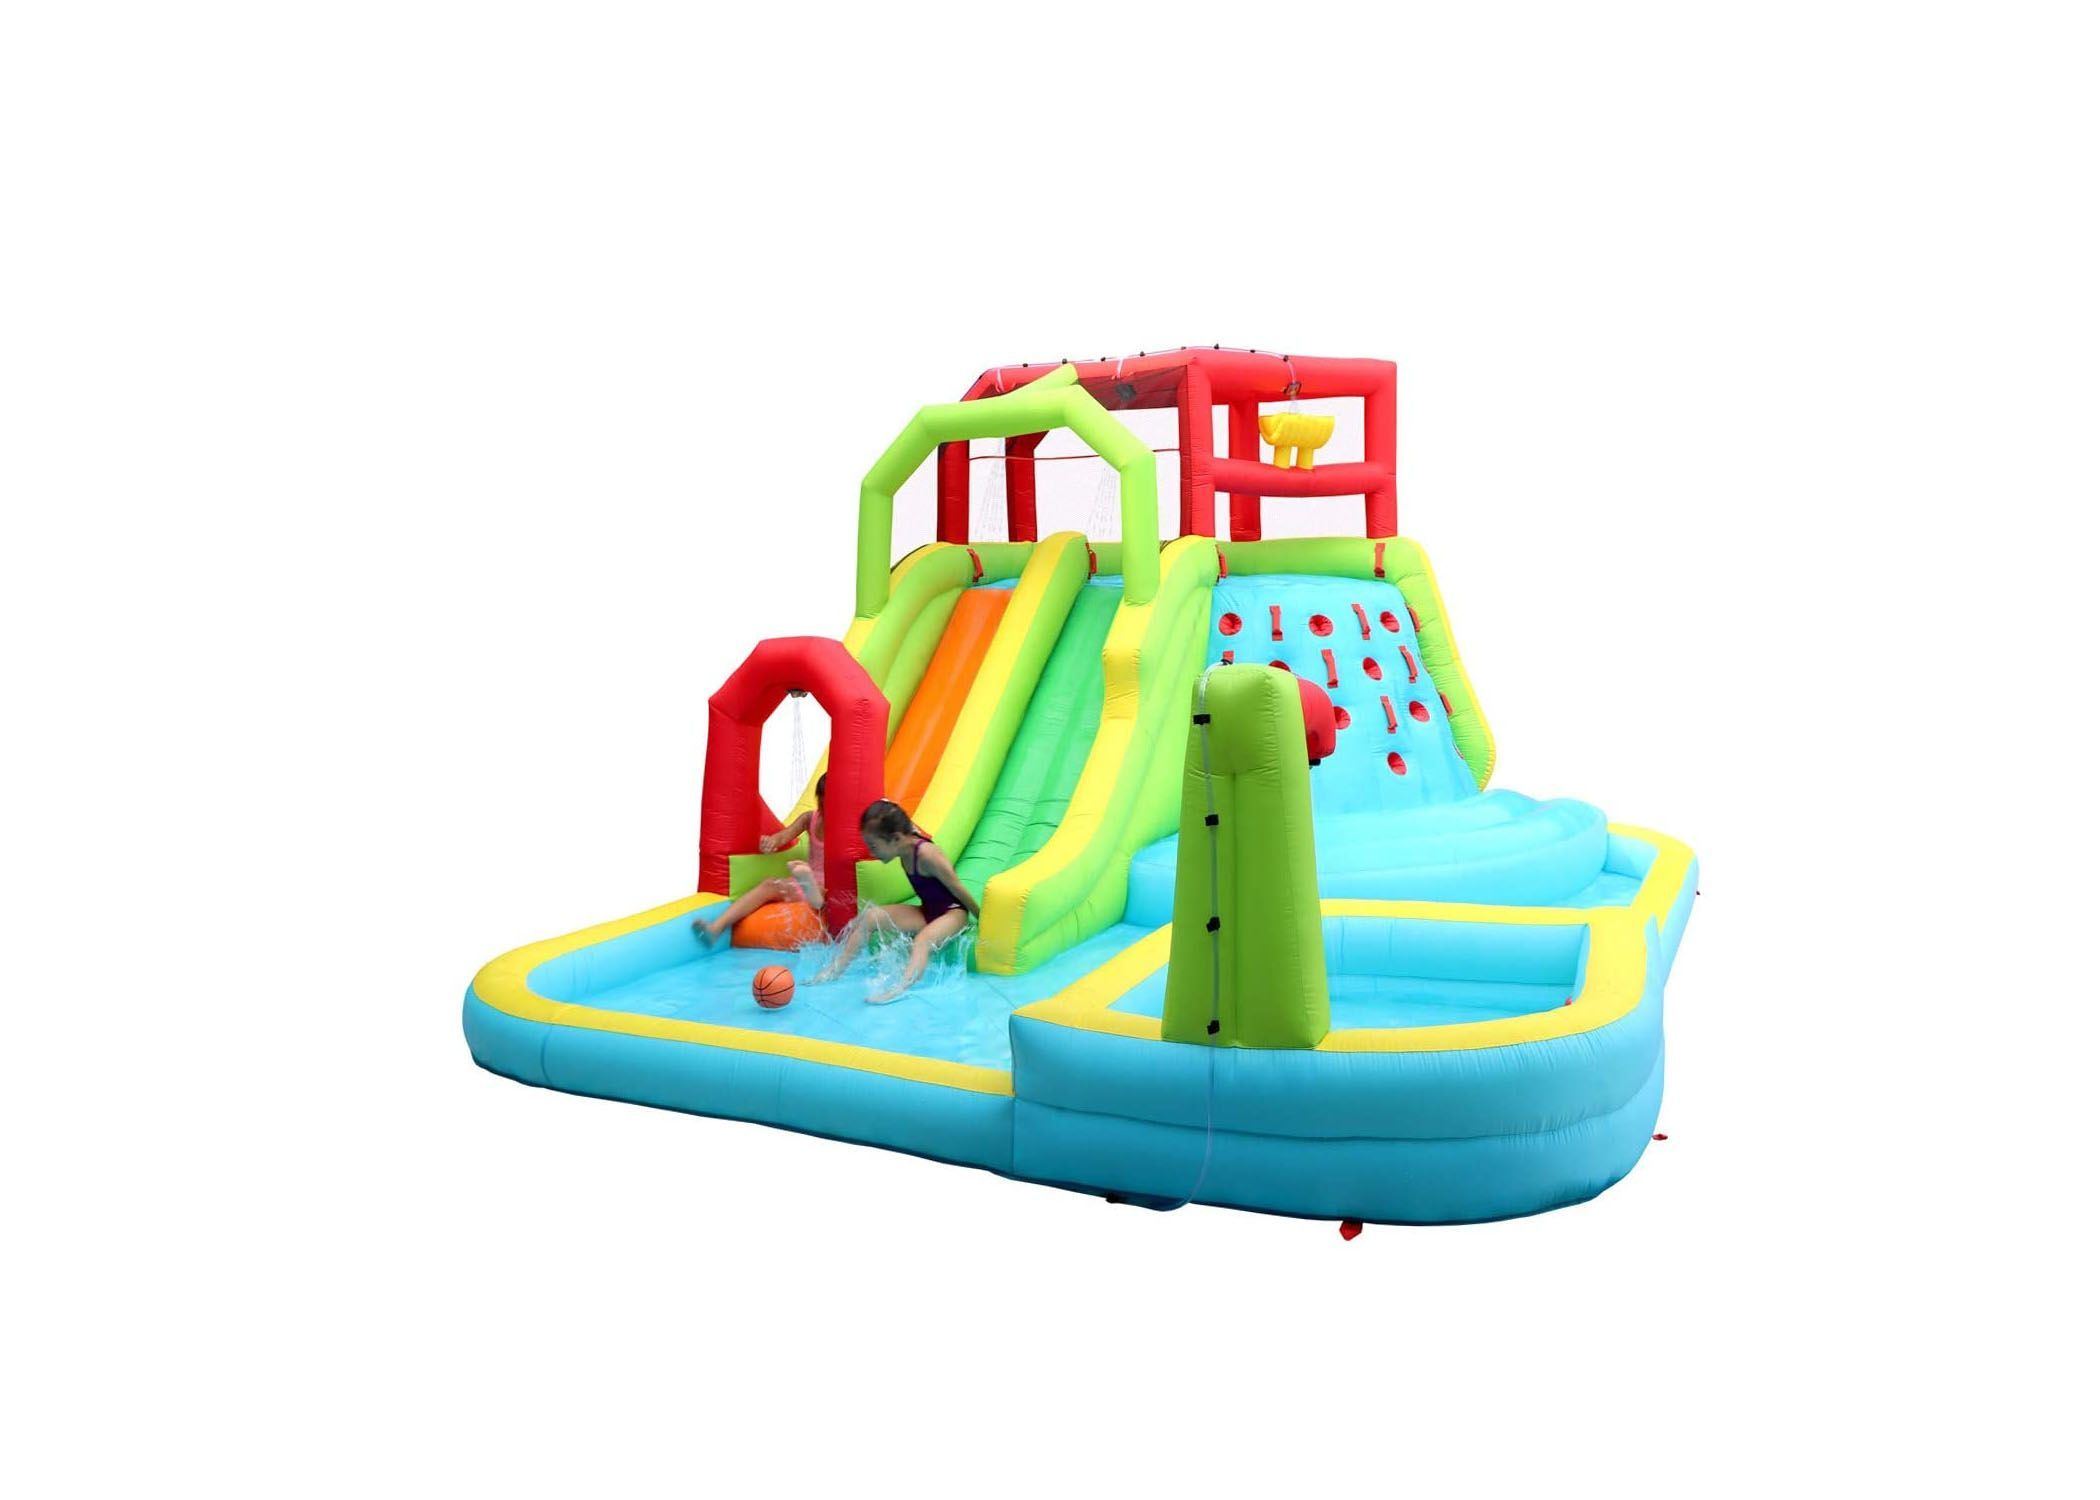 Details about   Single Waterslide Kids Inflatable Large Thick Surfing Watersports Outdoor Toy 